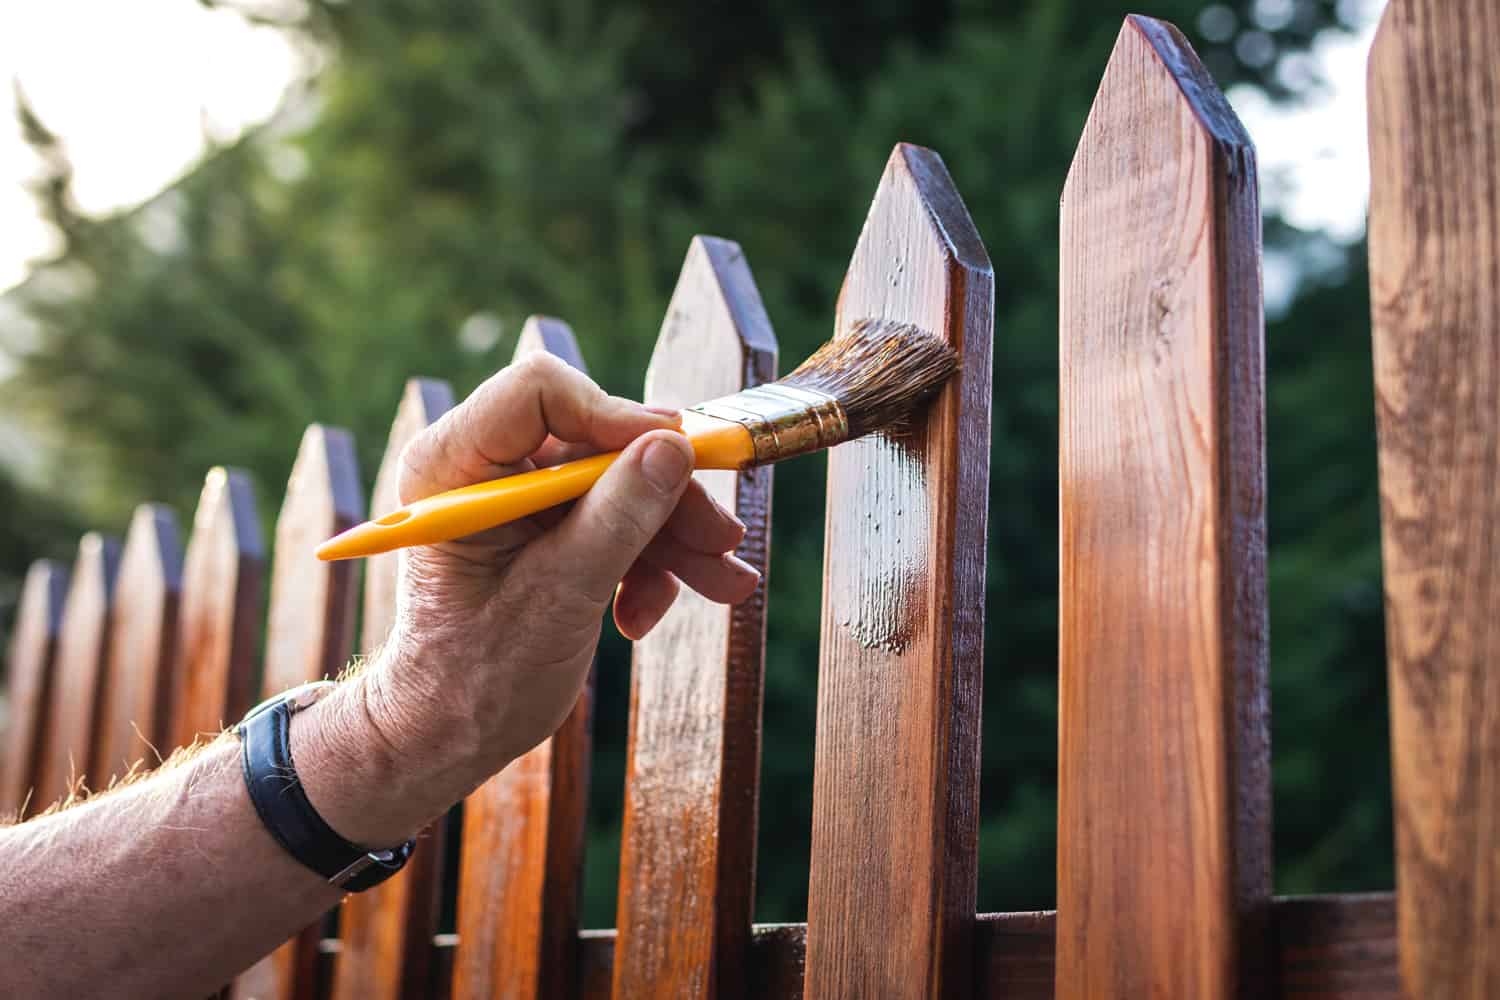 Man painting wood stain at timber plank in garden.